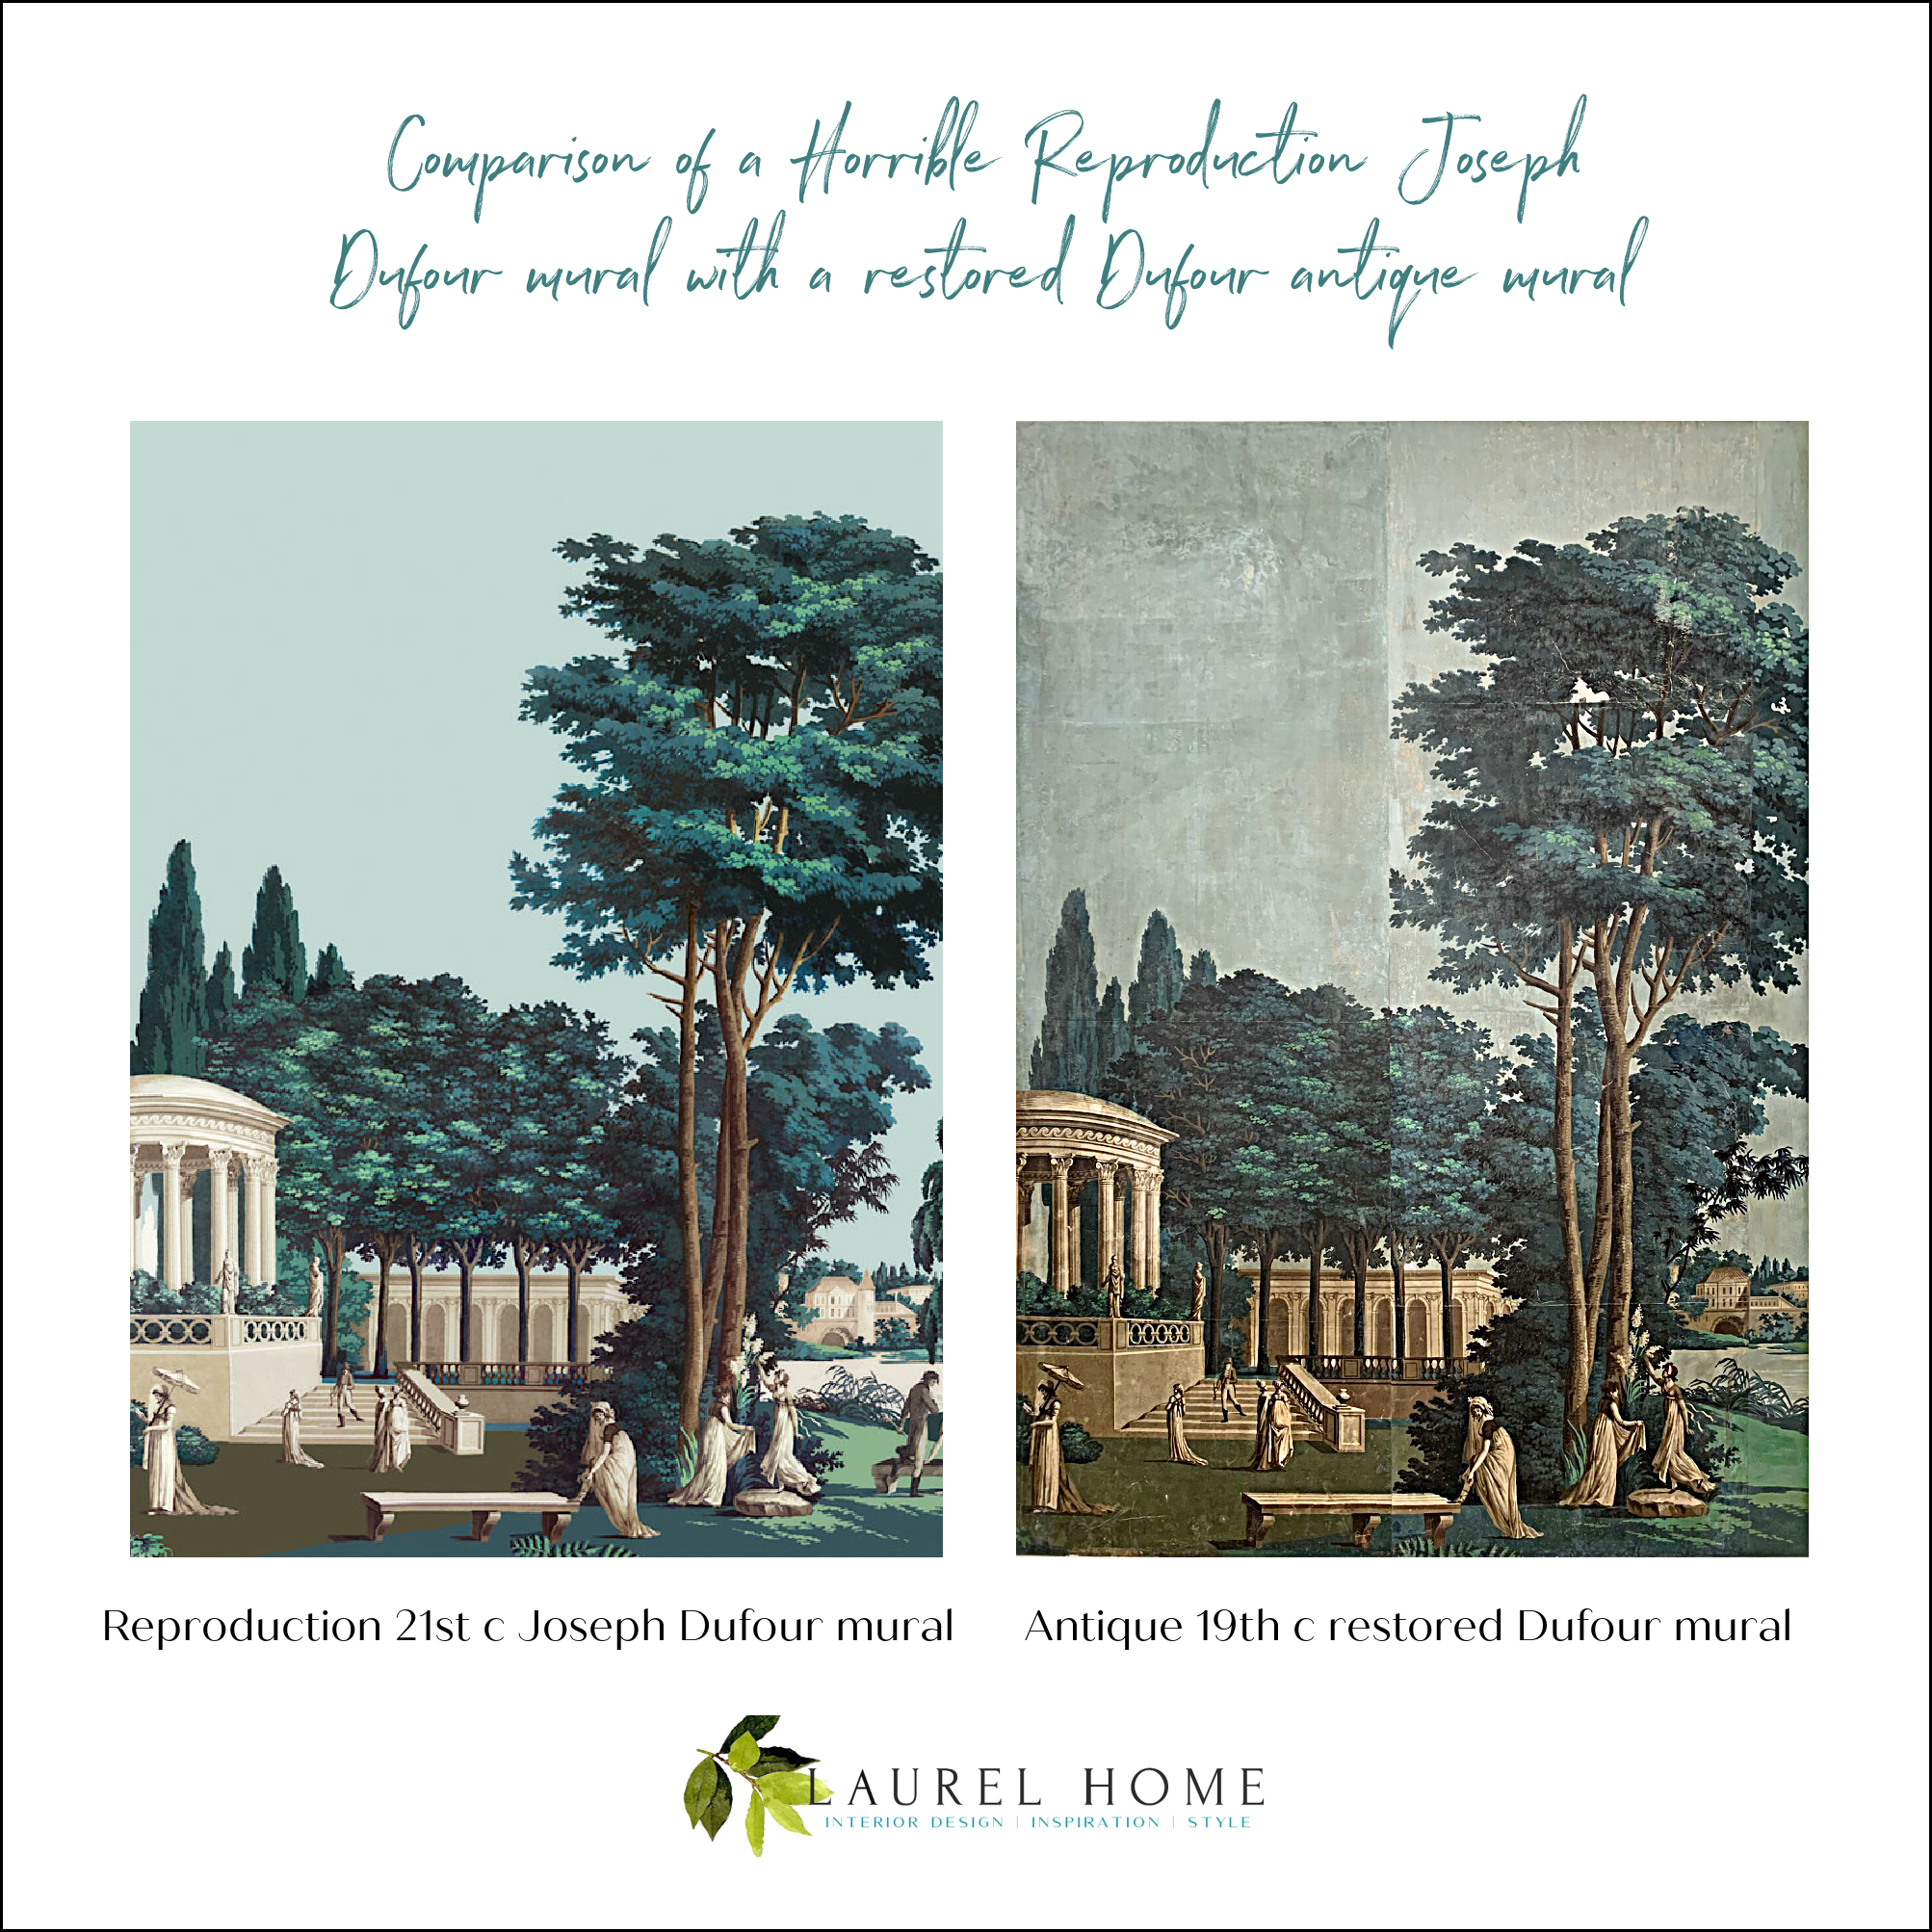 Comparison bad reproduction mural with restored antique mural